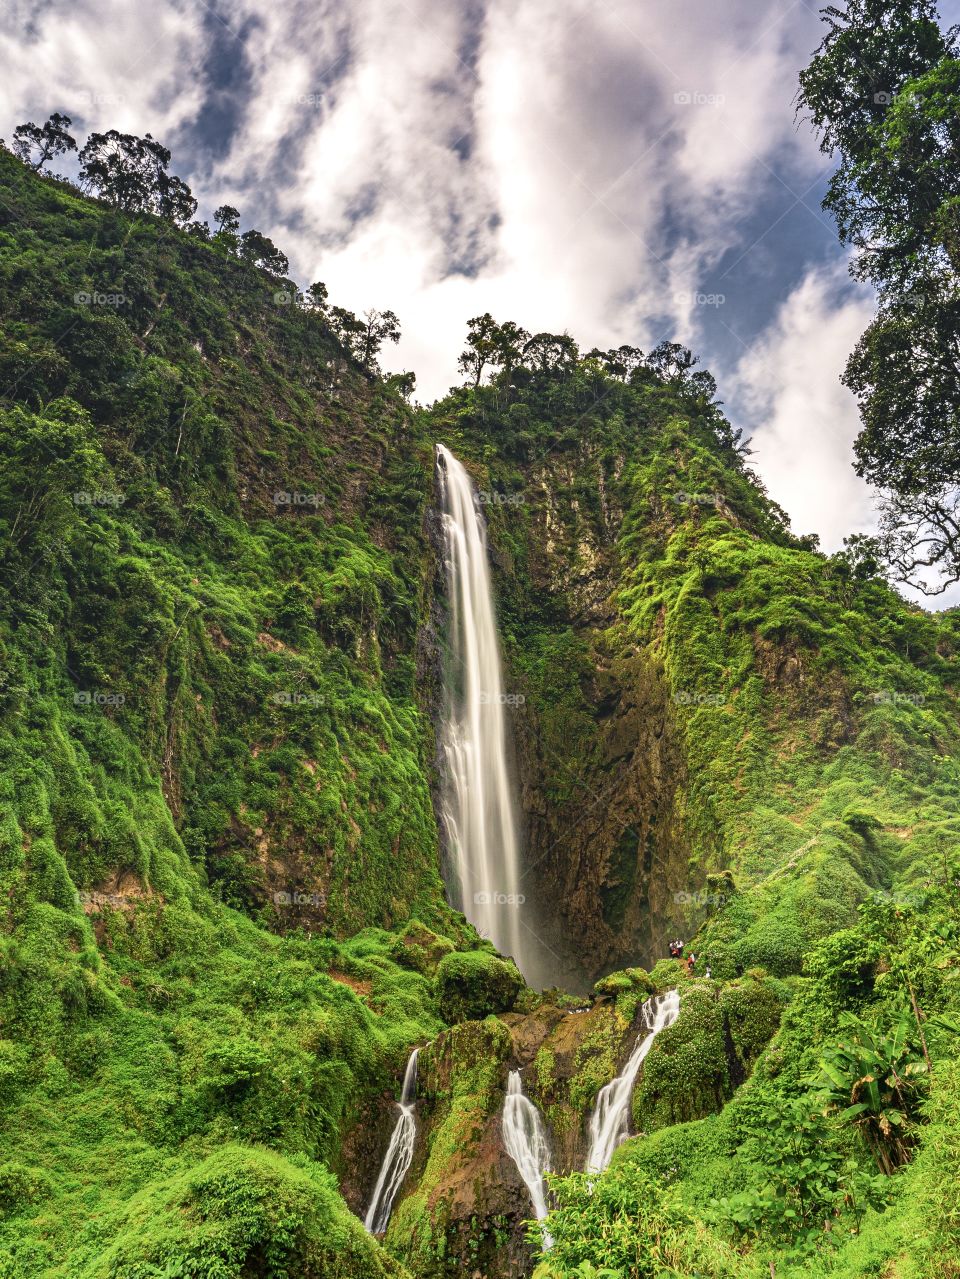 The number of waterfalls can be a potential renewable energy without destroying nature, and leaving it beautiful to look at.